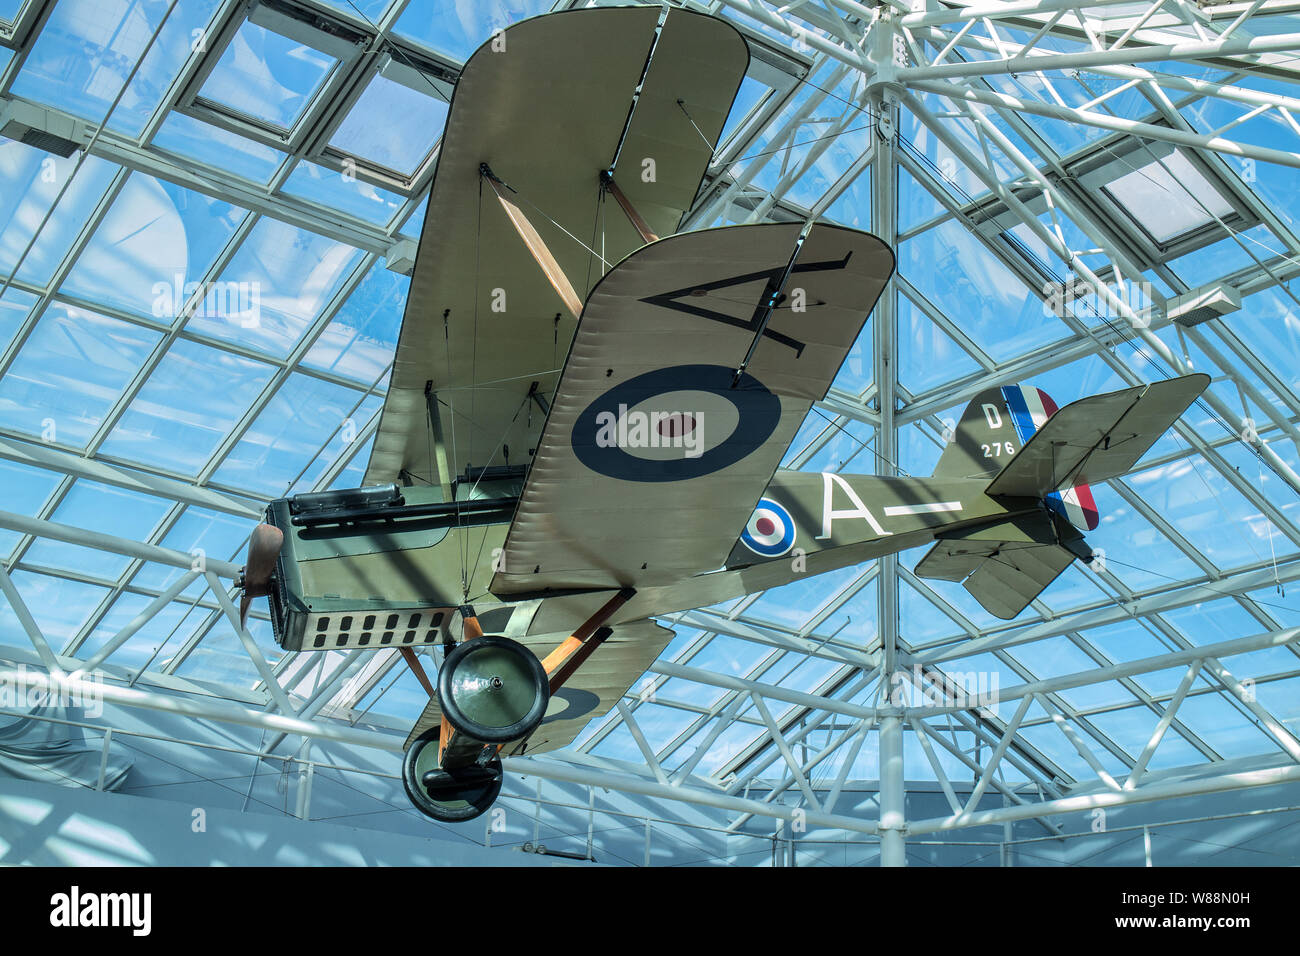 Replica SE5A First World War fighter biplane on display at Princes Mead Shopping Centre, Farnborough,Hampshire Stock Photo